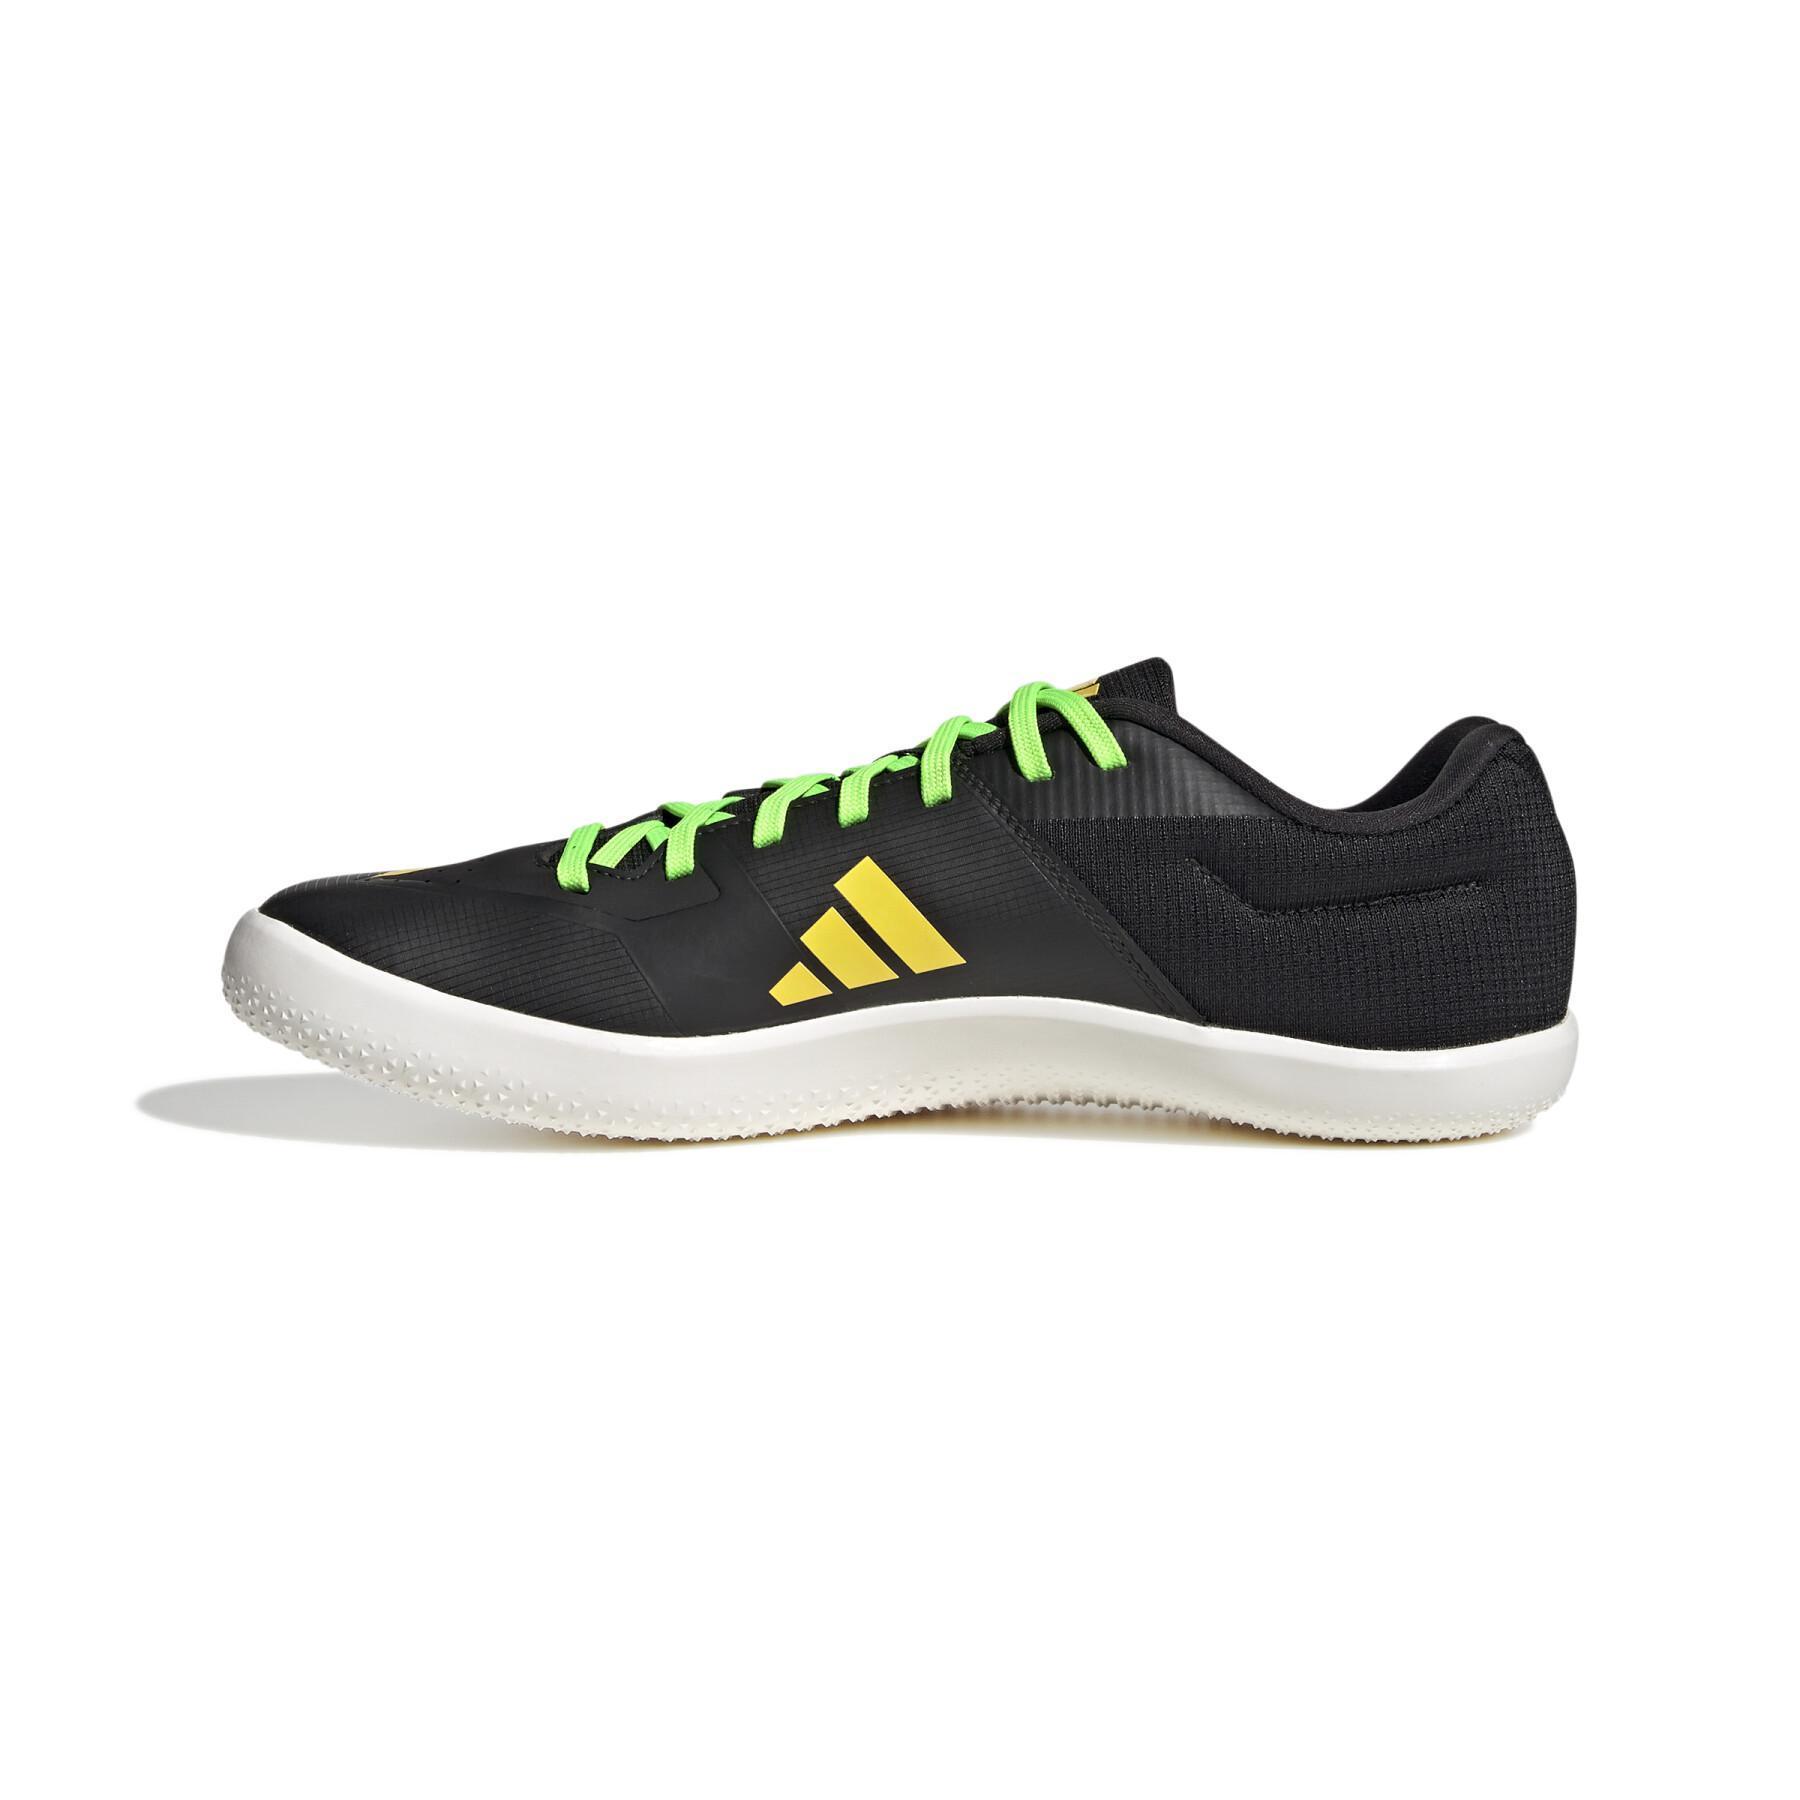 Athletic shoes adidas 75 Throwstar